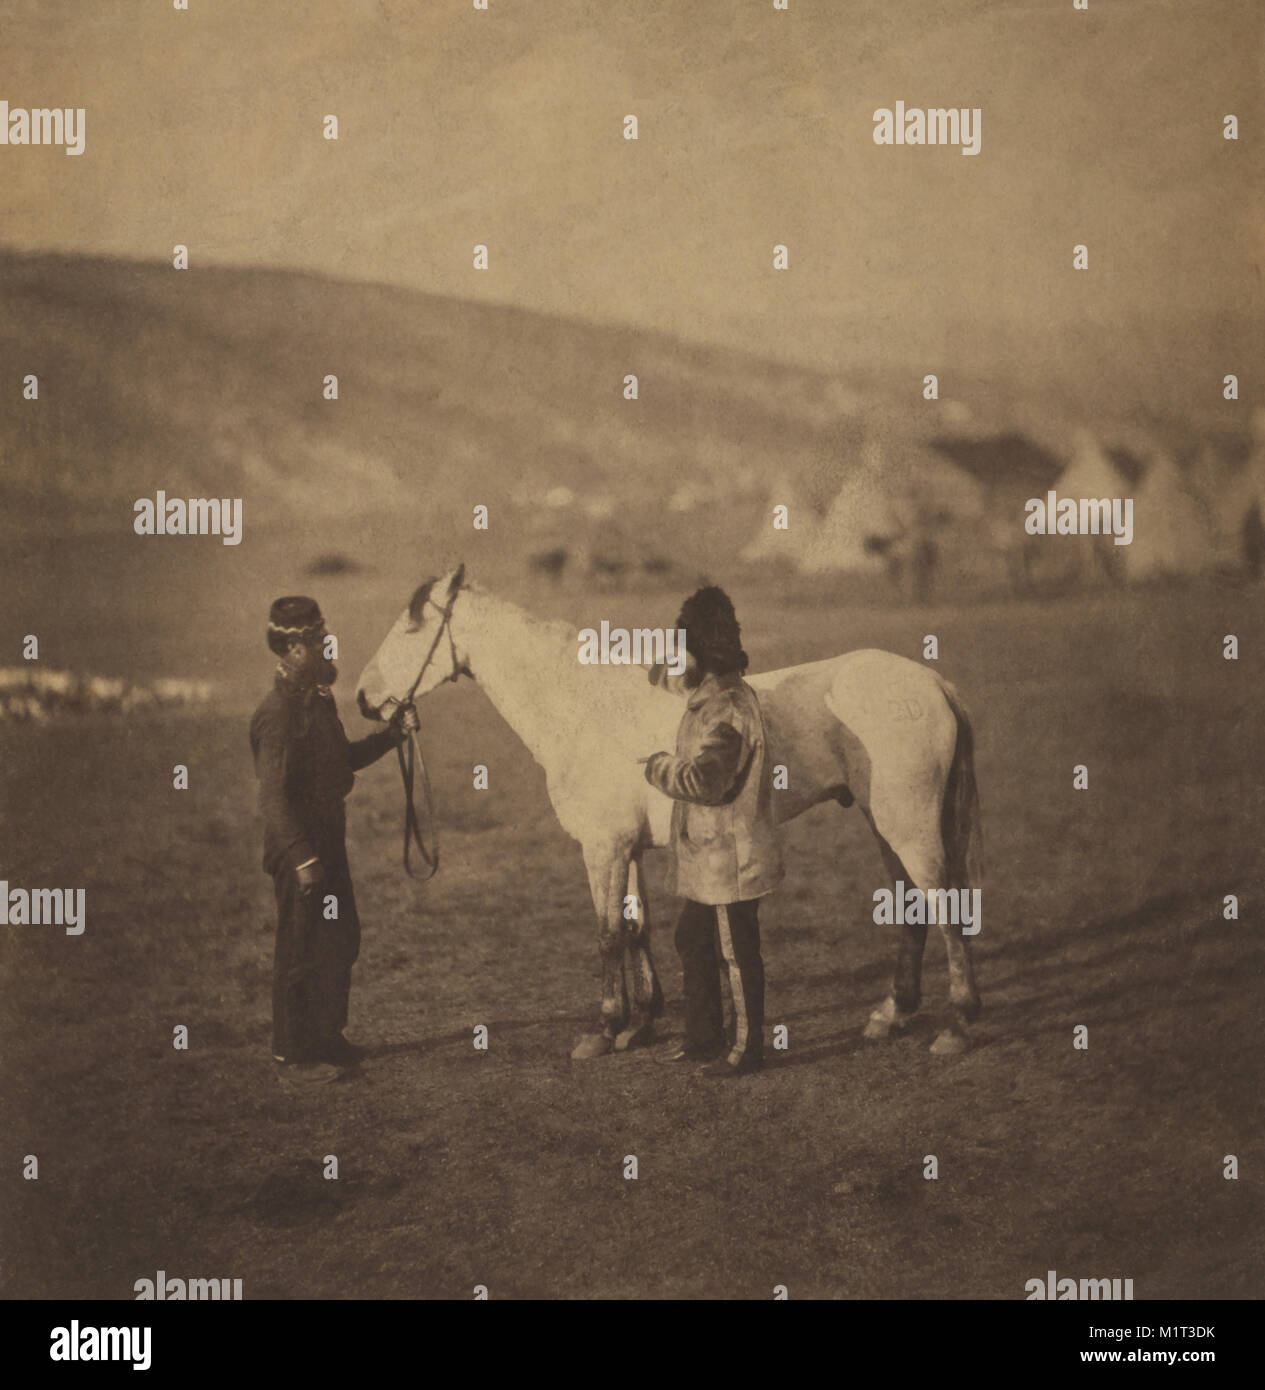 British Colonel George Clarke, Royal Scots Greys, Full-length Portrait, wearing uniform, Standing beside his Wounded Horse, Sultan and another Man with Encampment of Tents in Background, Crimean War, Crimea, Ukraine, by Roger Fenton, 1855 Stock Photo